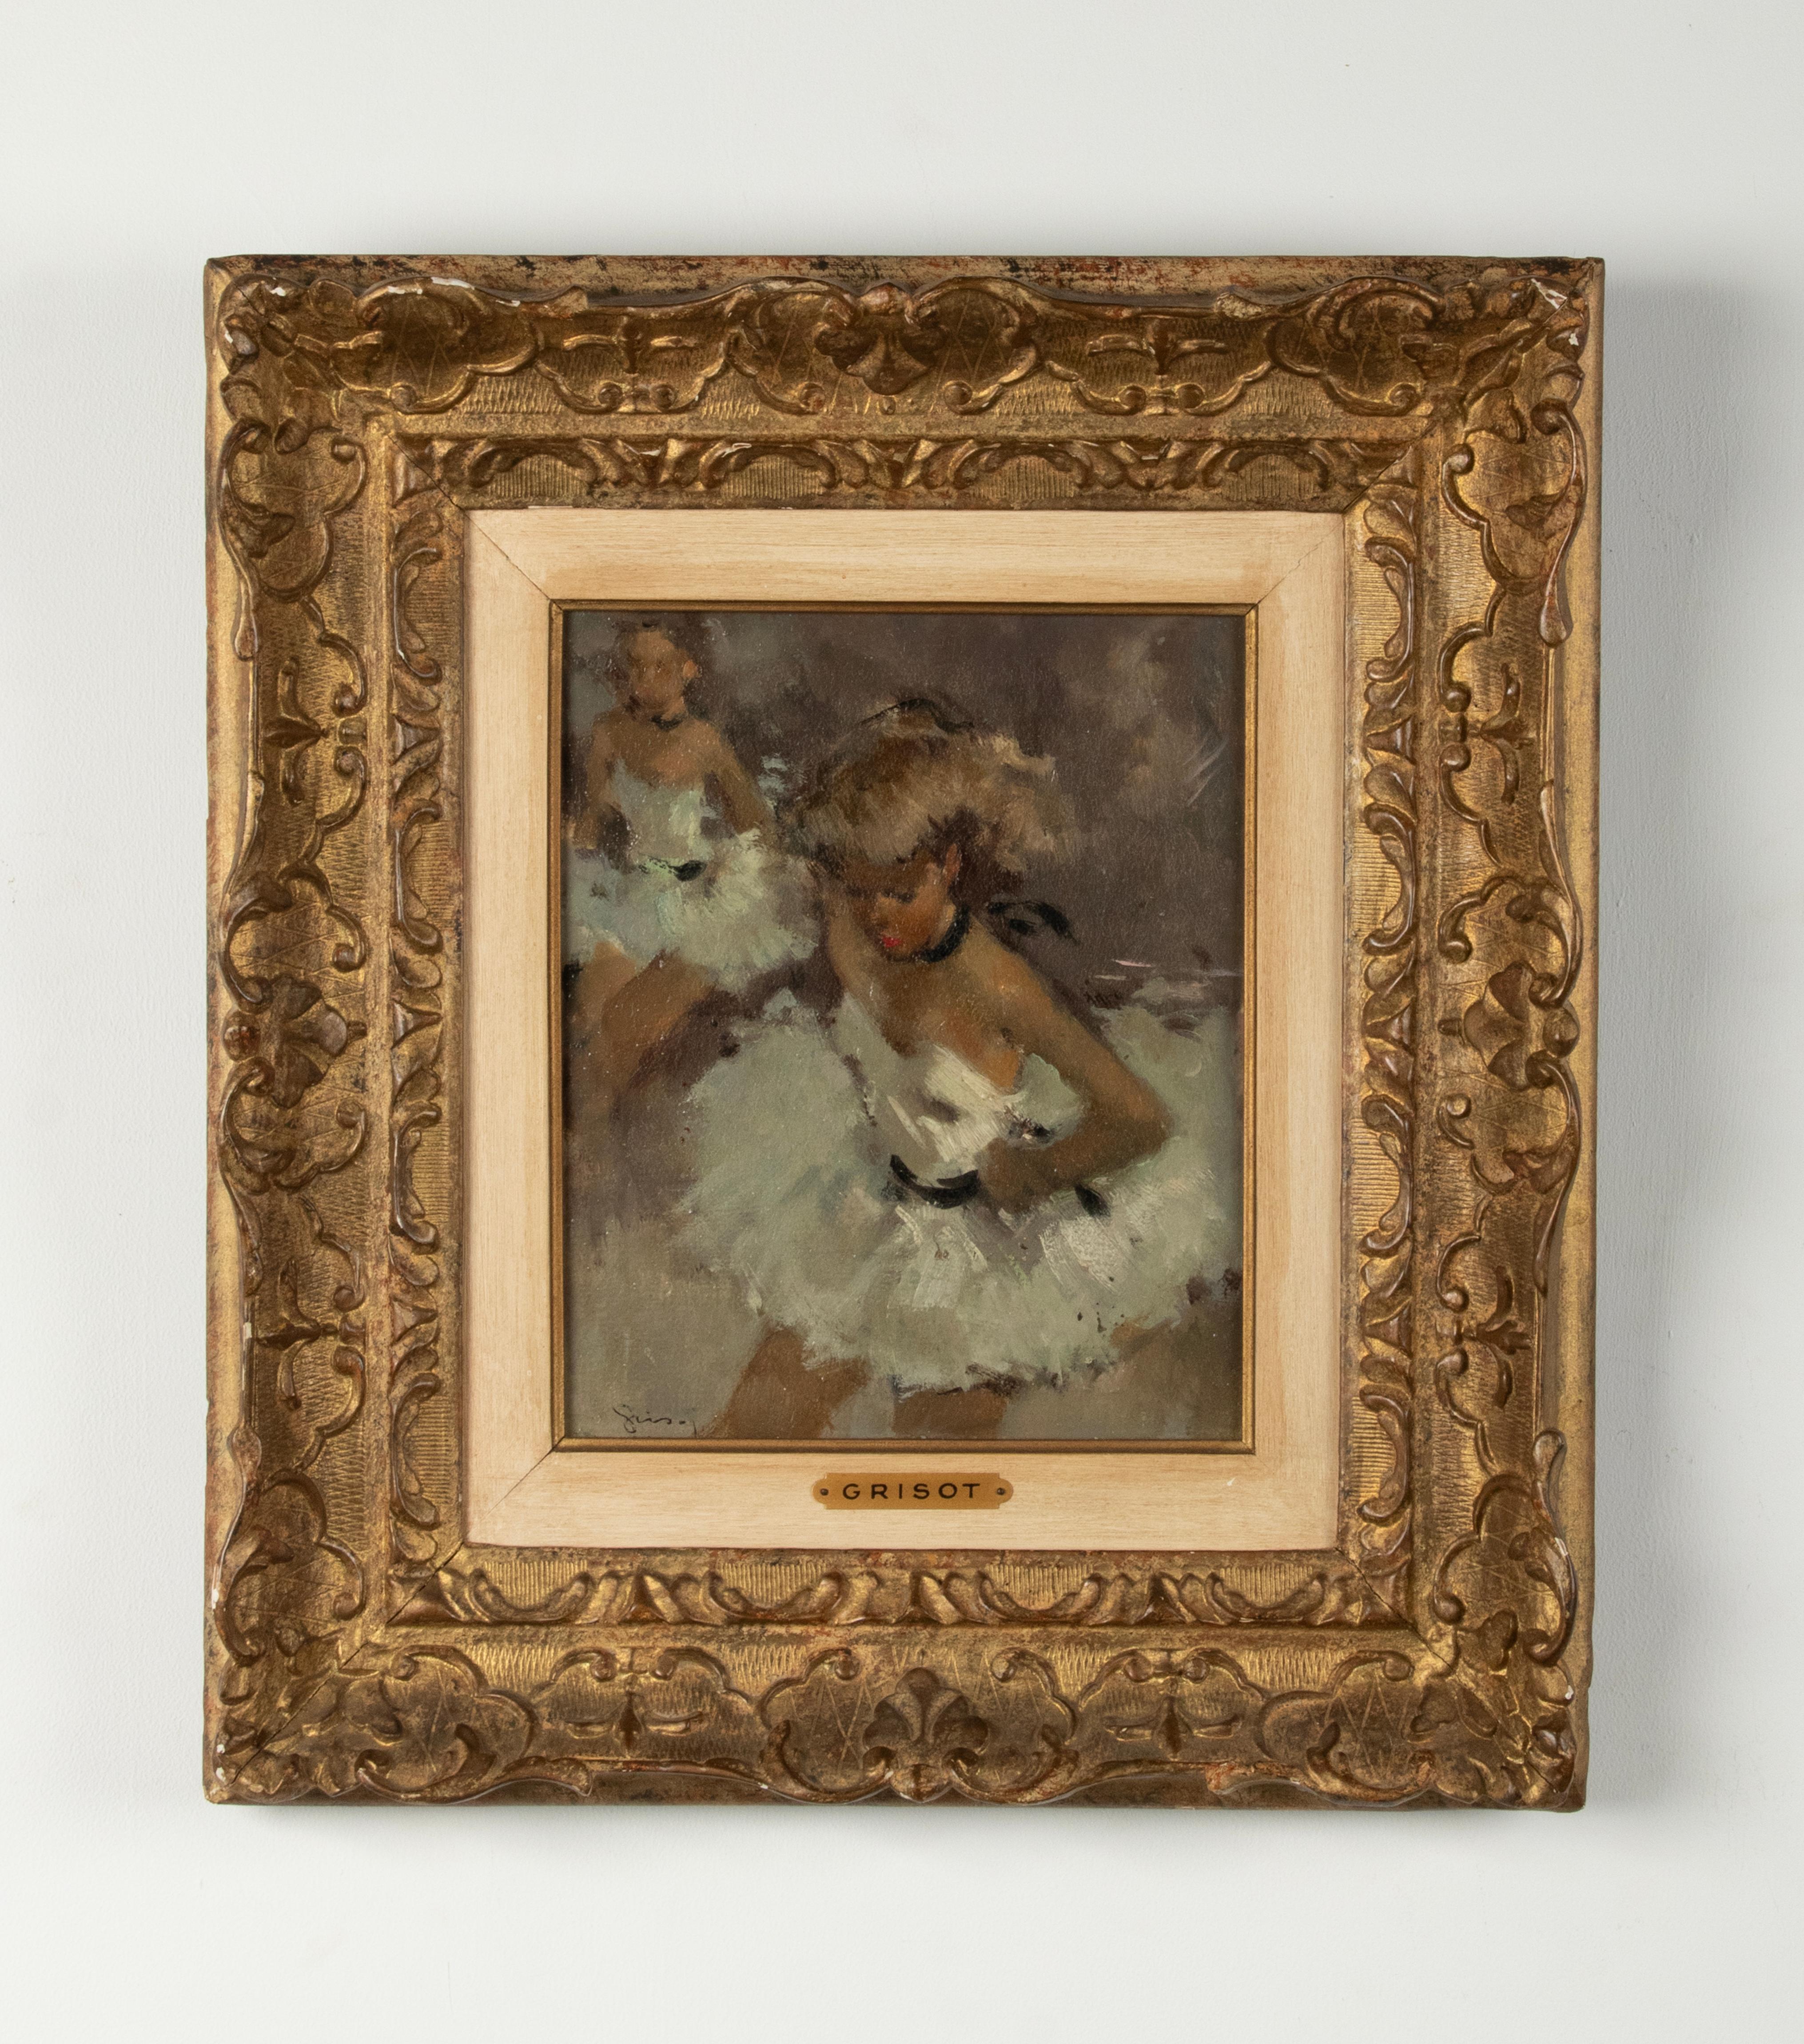 A lovely vintage painting of a ballet dancer, made by the French artist Pierre Grisot. 
Oil painting on hardboard, framed in a classic frame. 
Dimensions frame: 47 x 42 cm
Dimensions painting: 25 x 20 cm
Free shipping

Pierre Gristot. France,